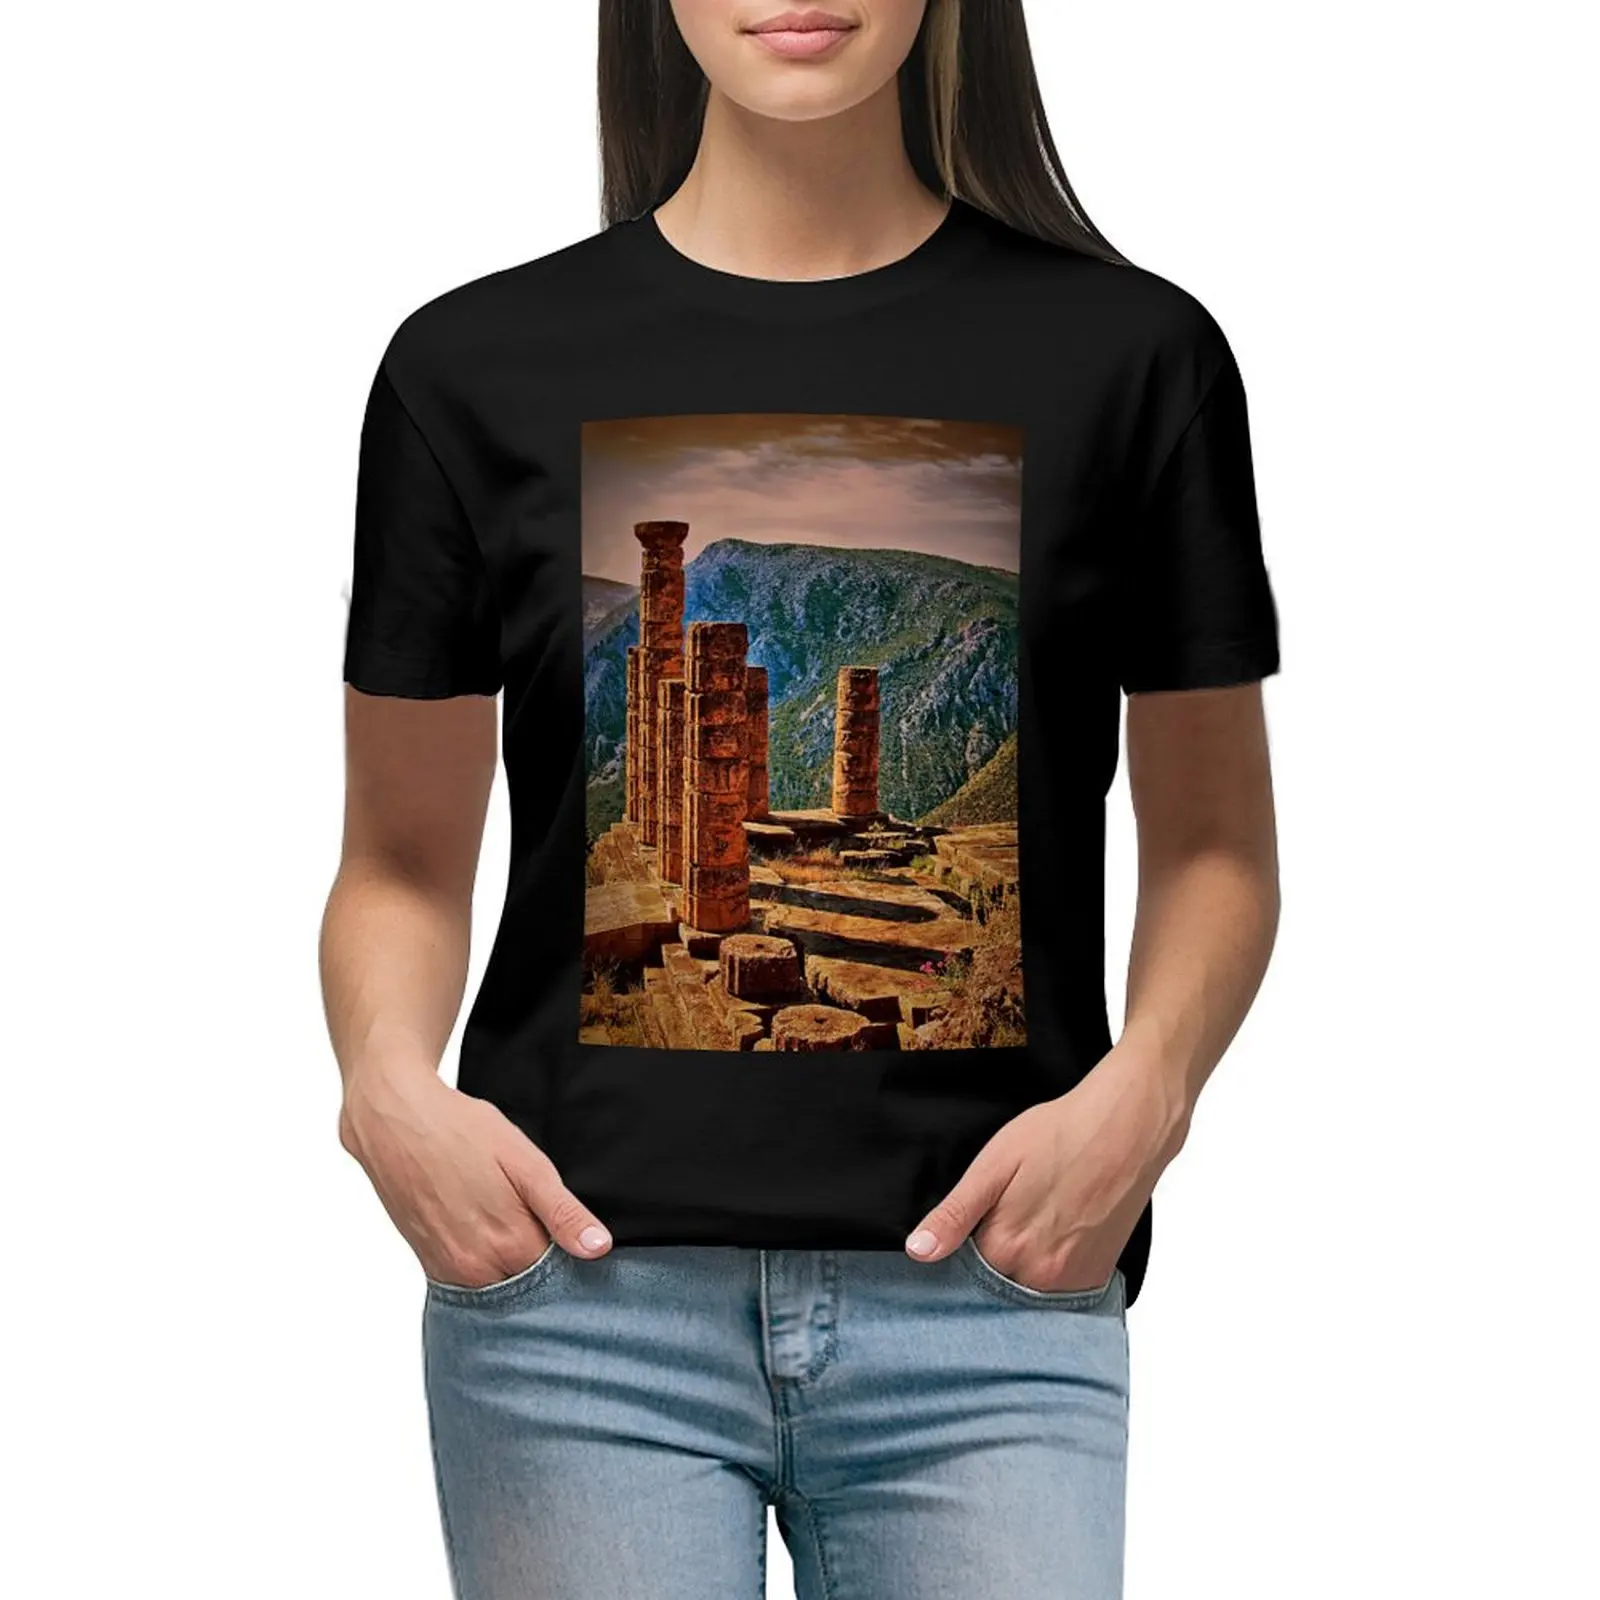 

Greece. Delphi. The Ruins of Temple of Apollo. T-shirt plus size tops Summer Women's clothing